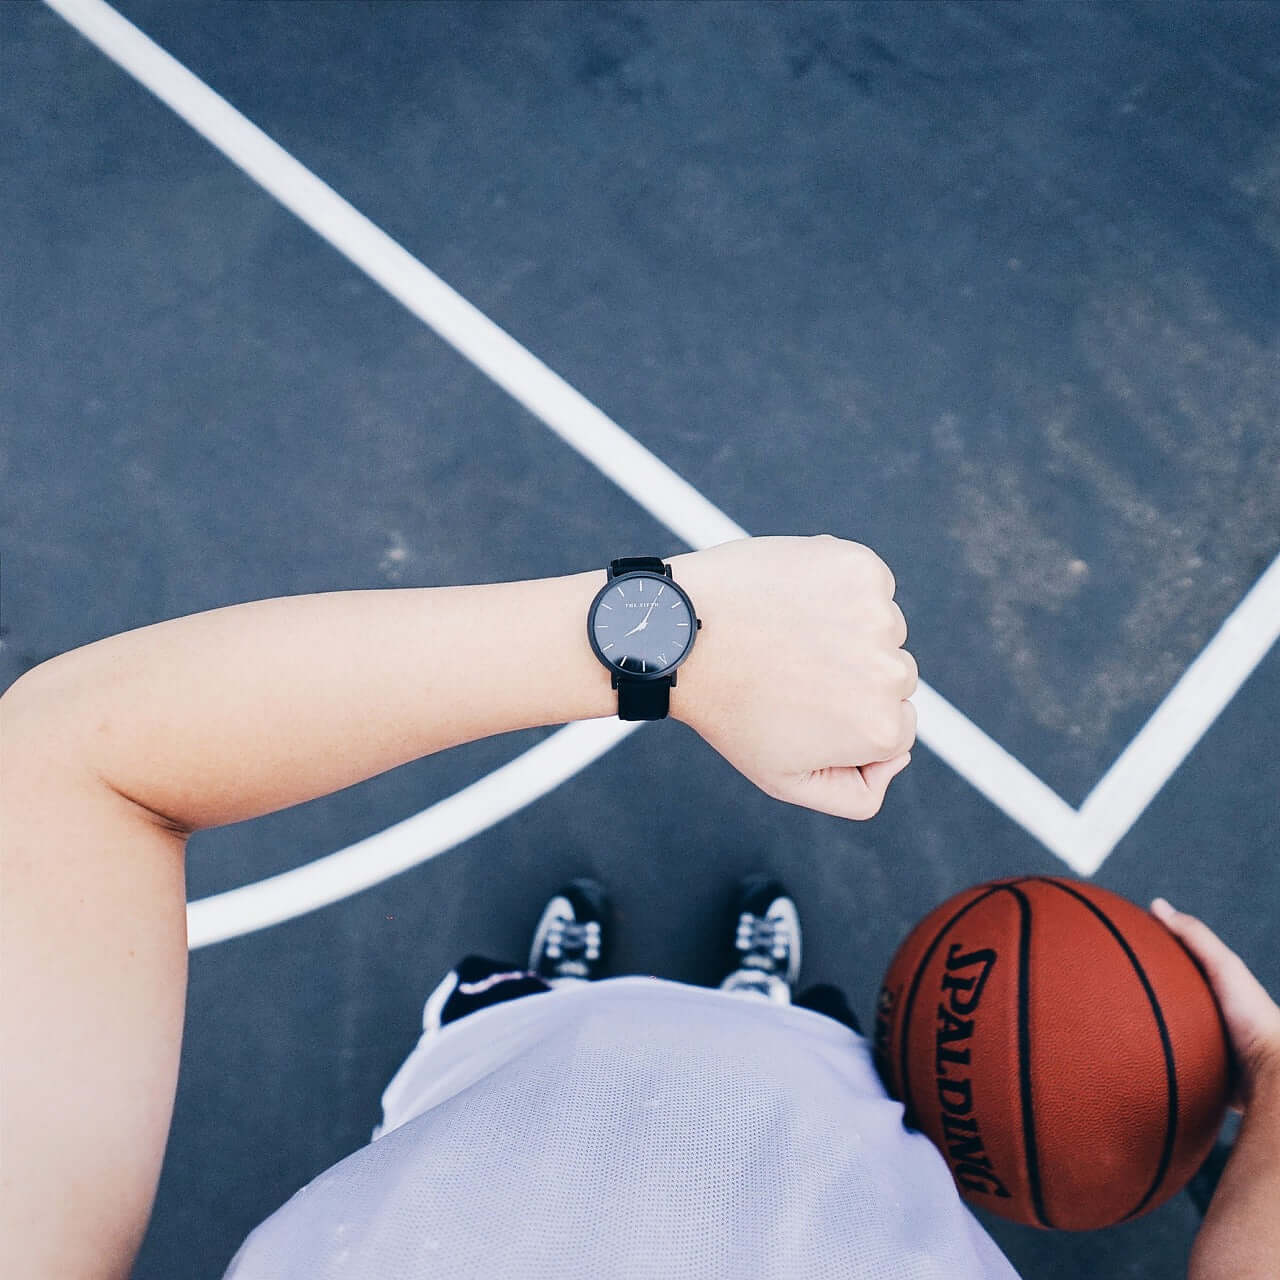 Can a Sports Watch Help Athletic Ability?